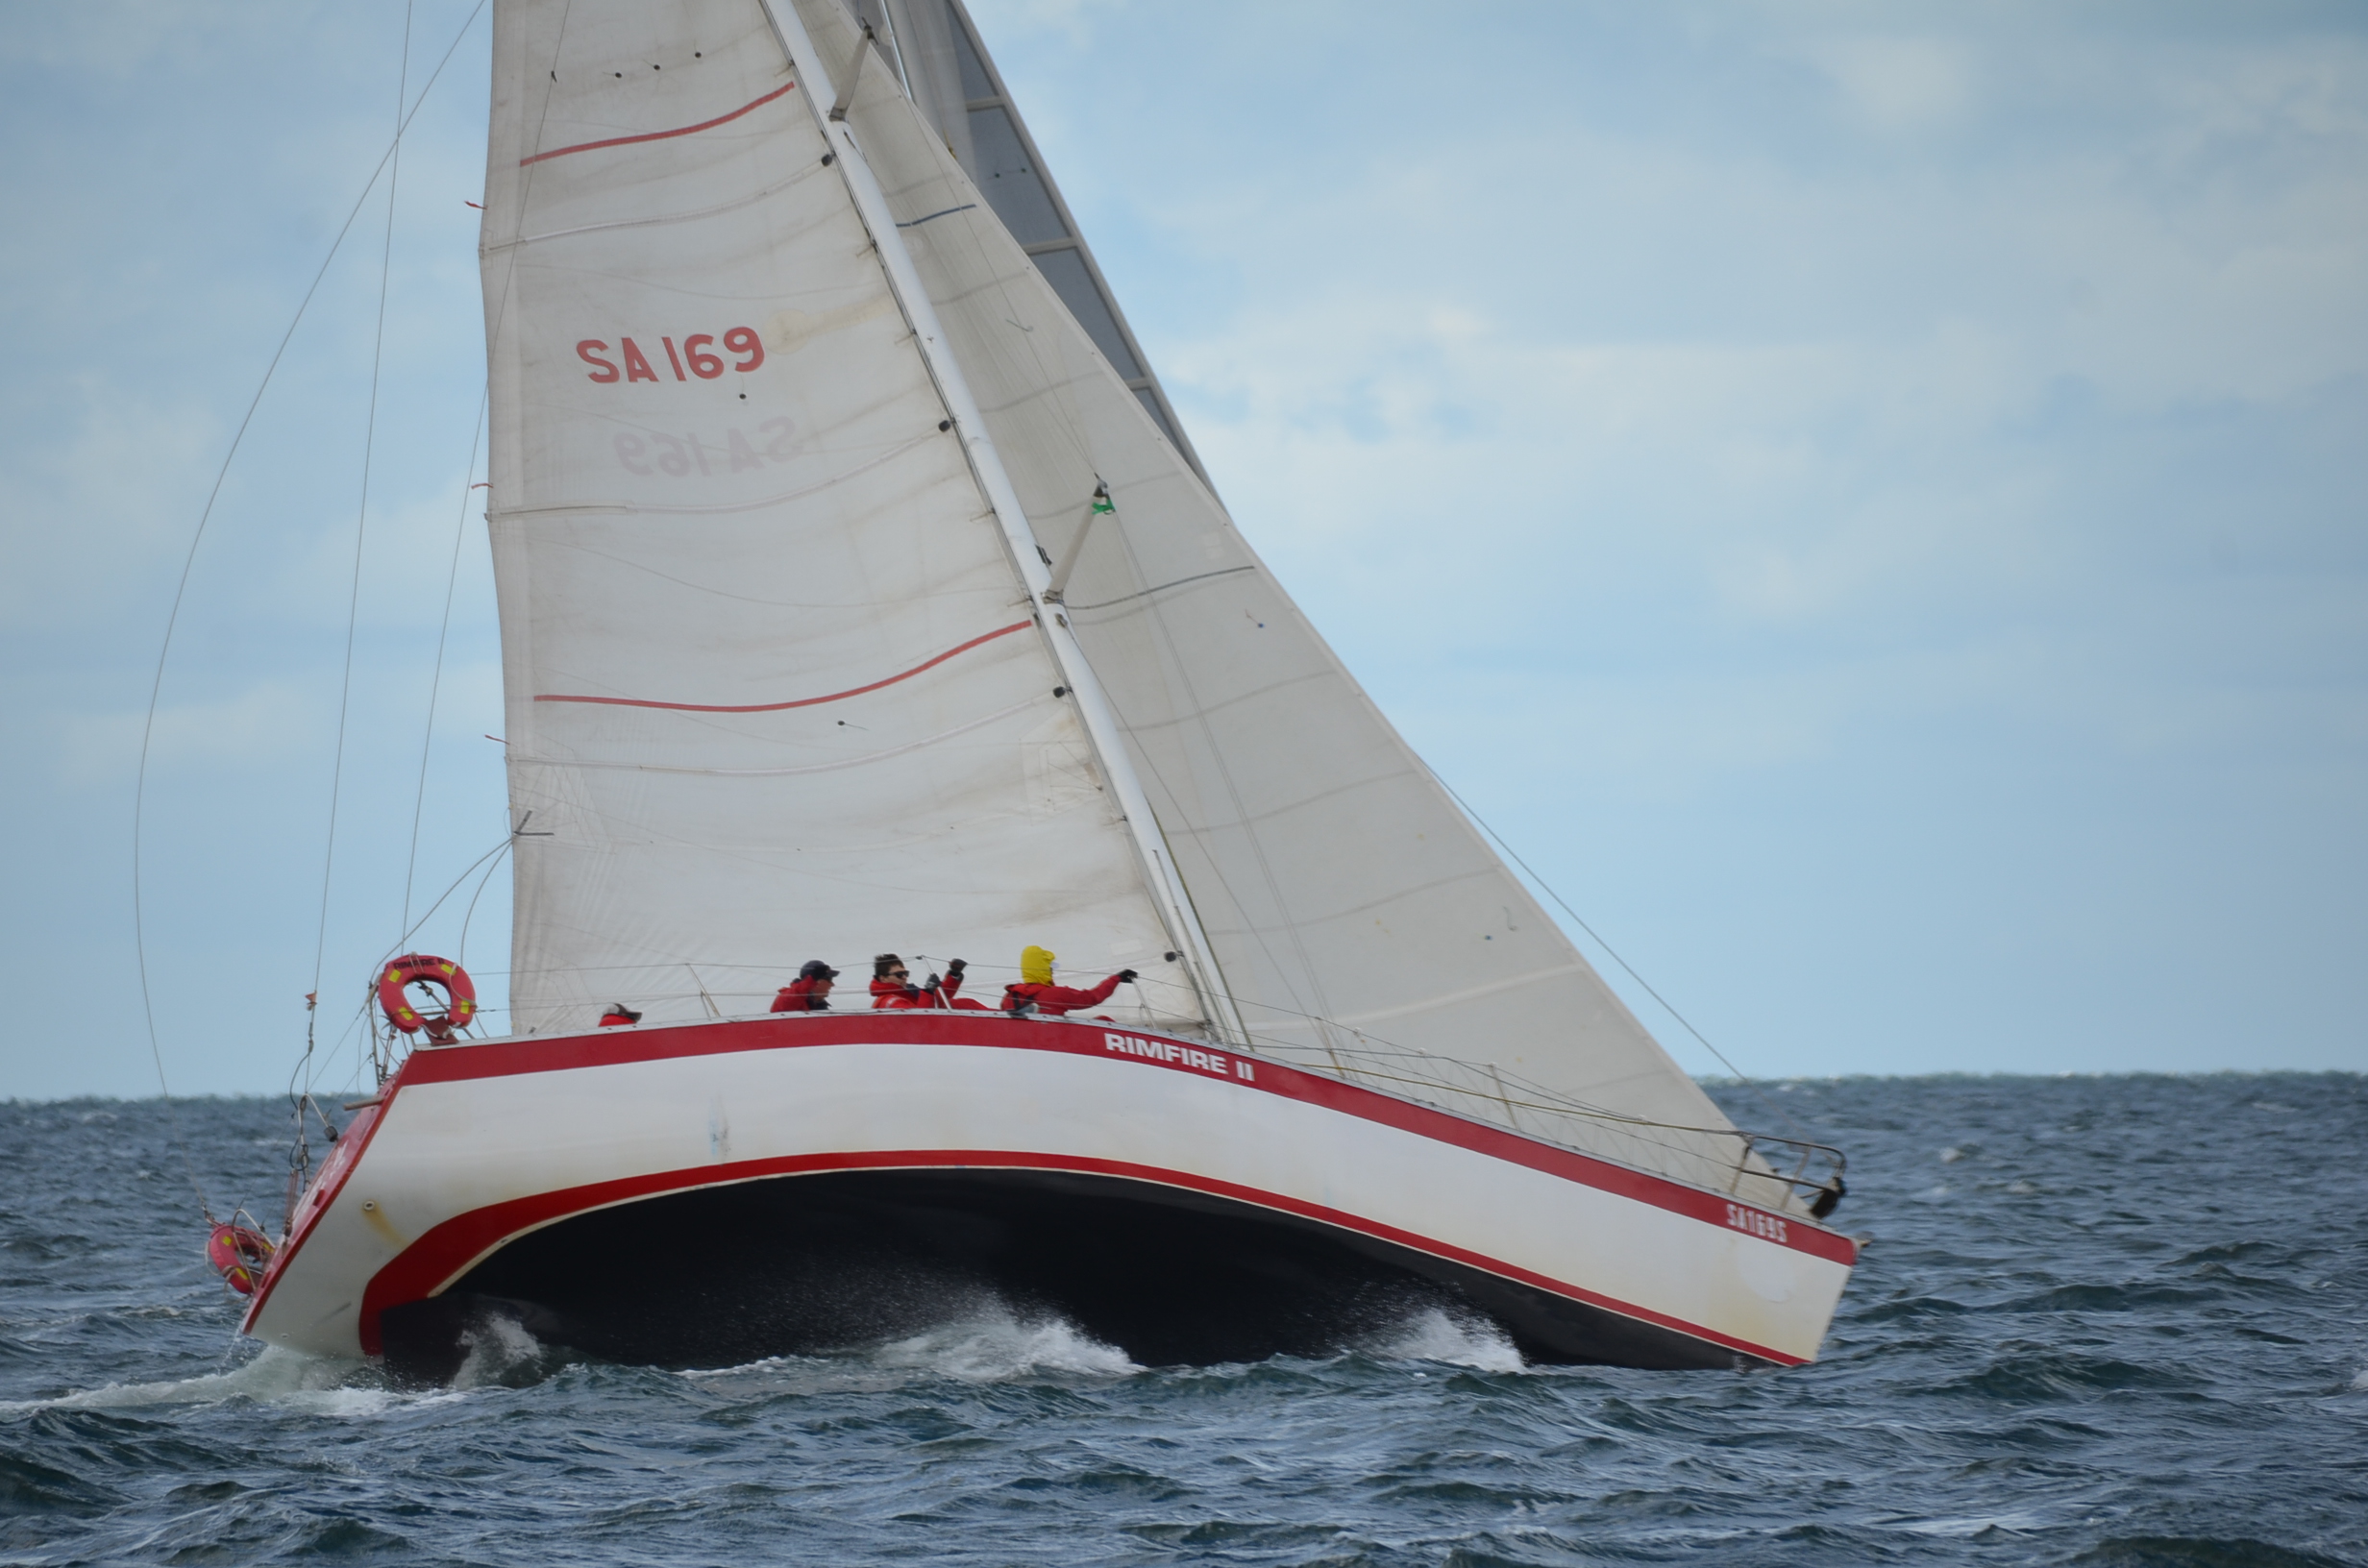 Champions crowned in King of the Gulf regatta